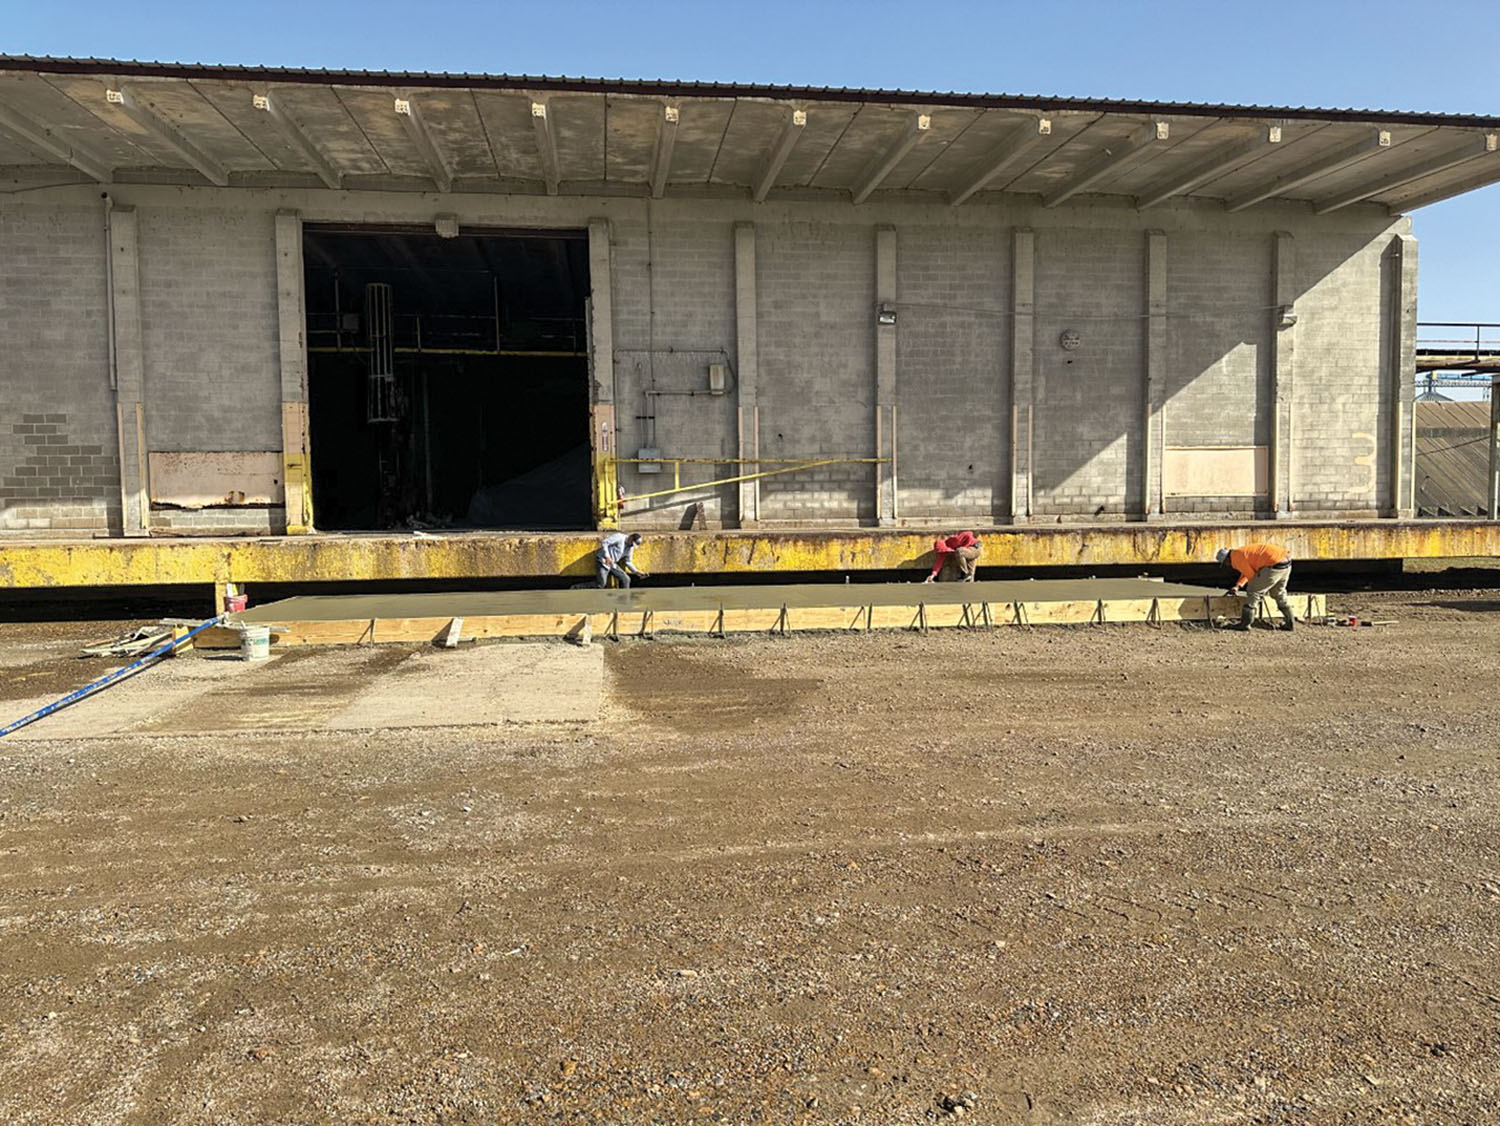 Crews pour concrete to add new fertilizer blending capabilities at the Mississippi River fertilizer and grain terminal where Scates Group Intermodal took over operations on February 27 in Helena, Ark. (Photo courtesy of Scates Group Intermodal Helena River Terminal)